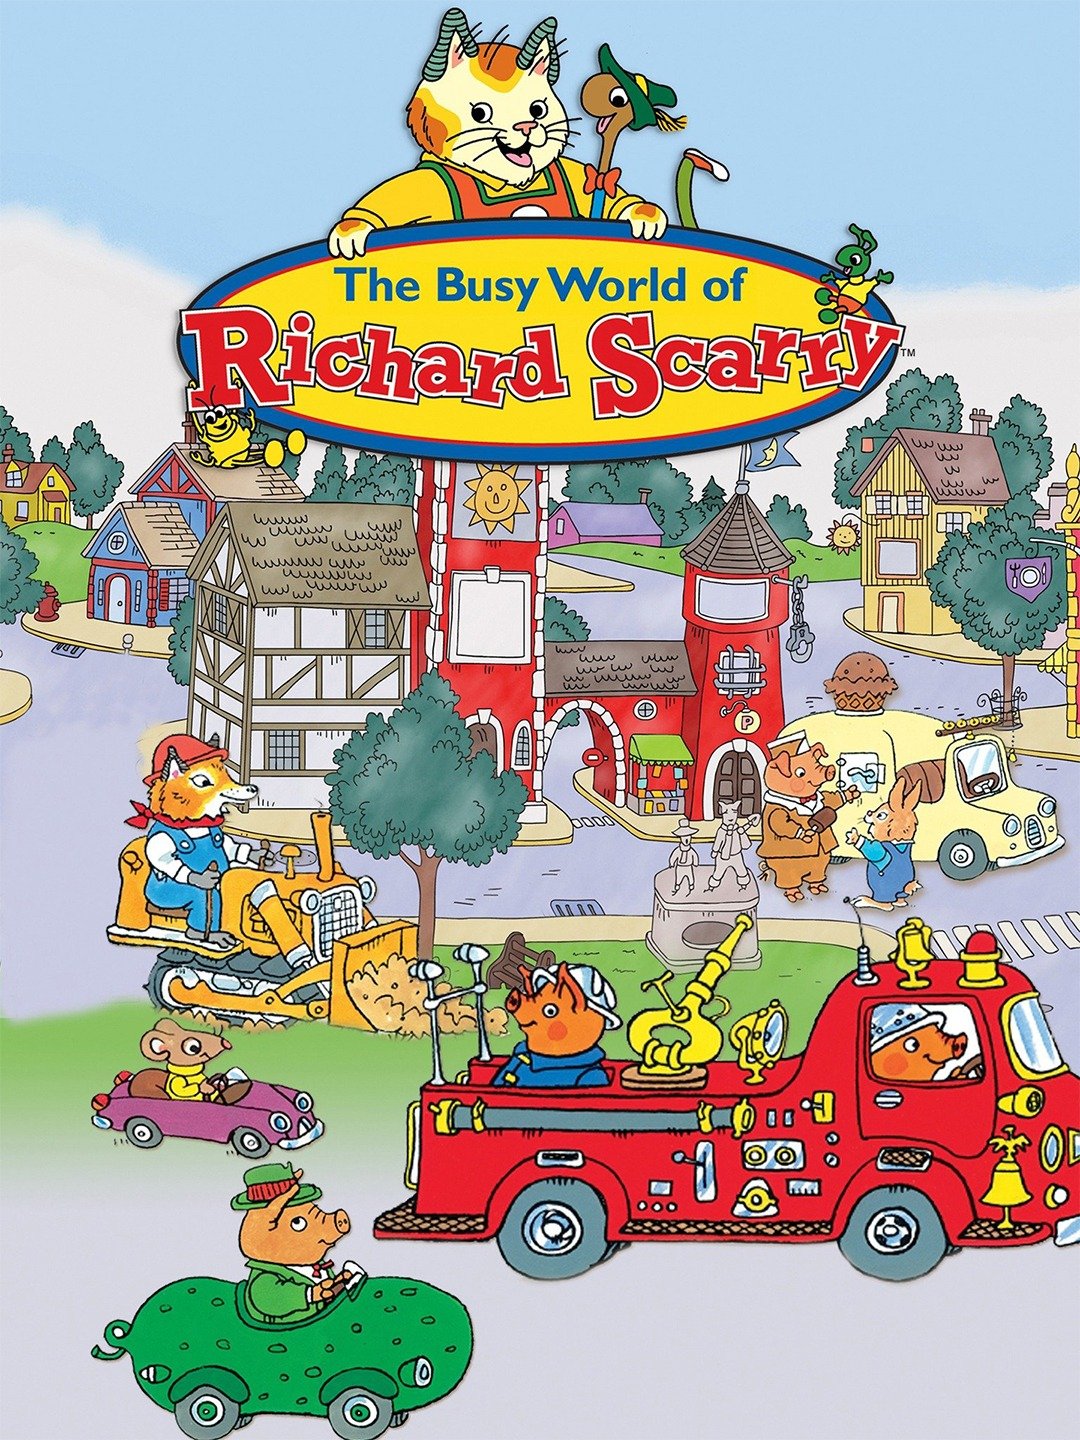 The Busy World of Richard Scarry, The Dubbing Database